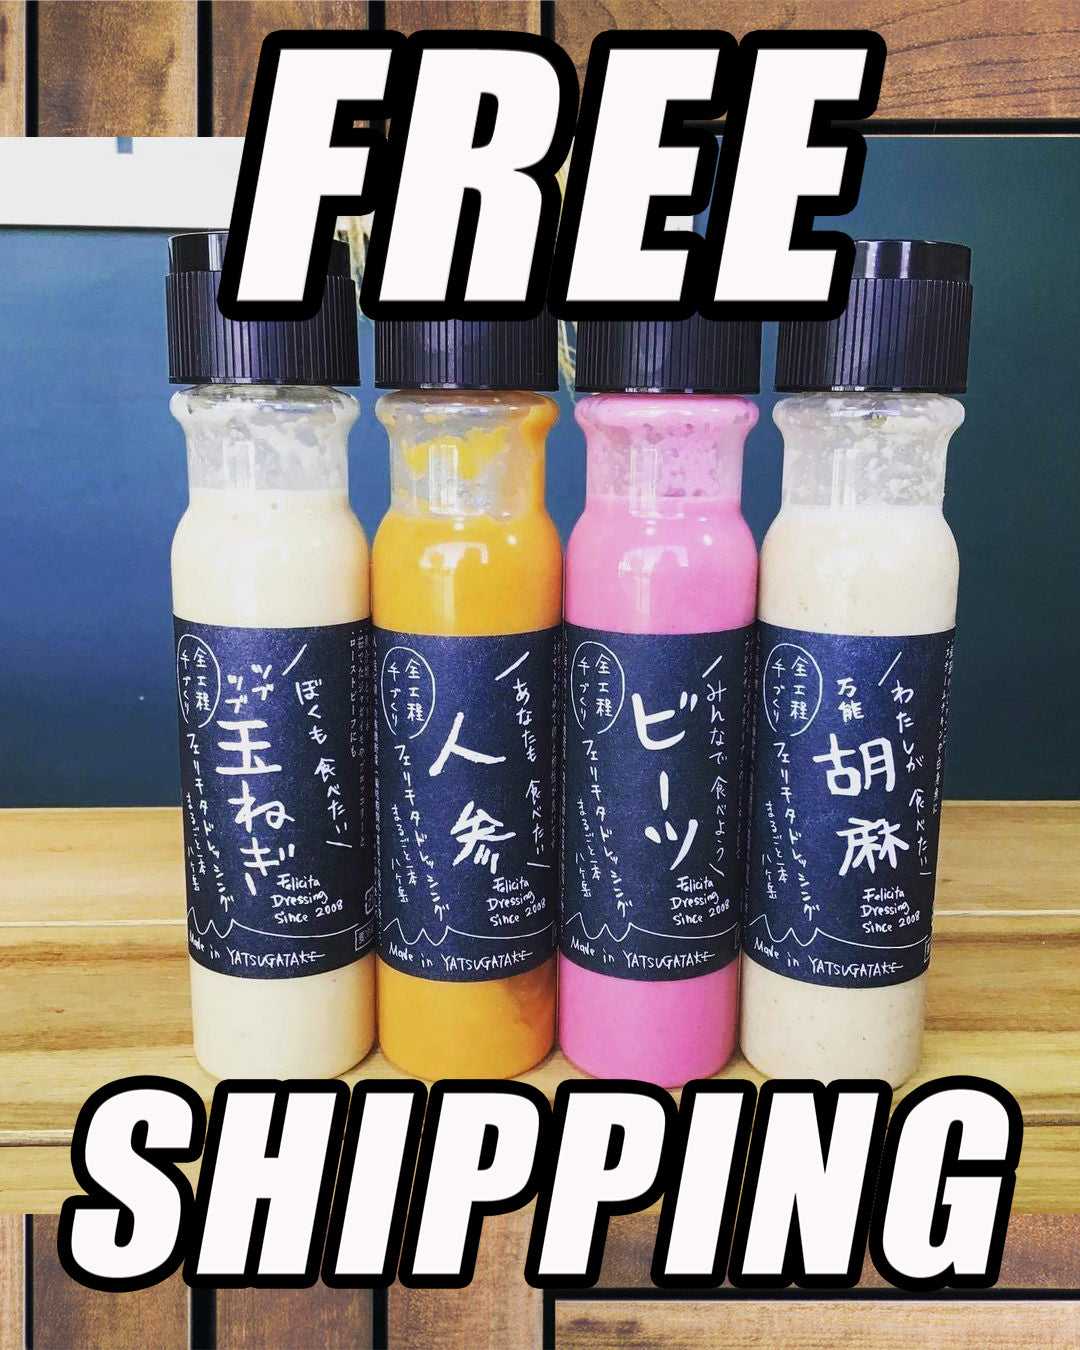 Free shipping campaign reel is now available on FB and IG!